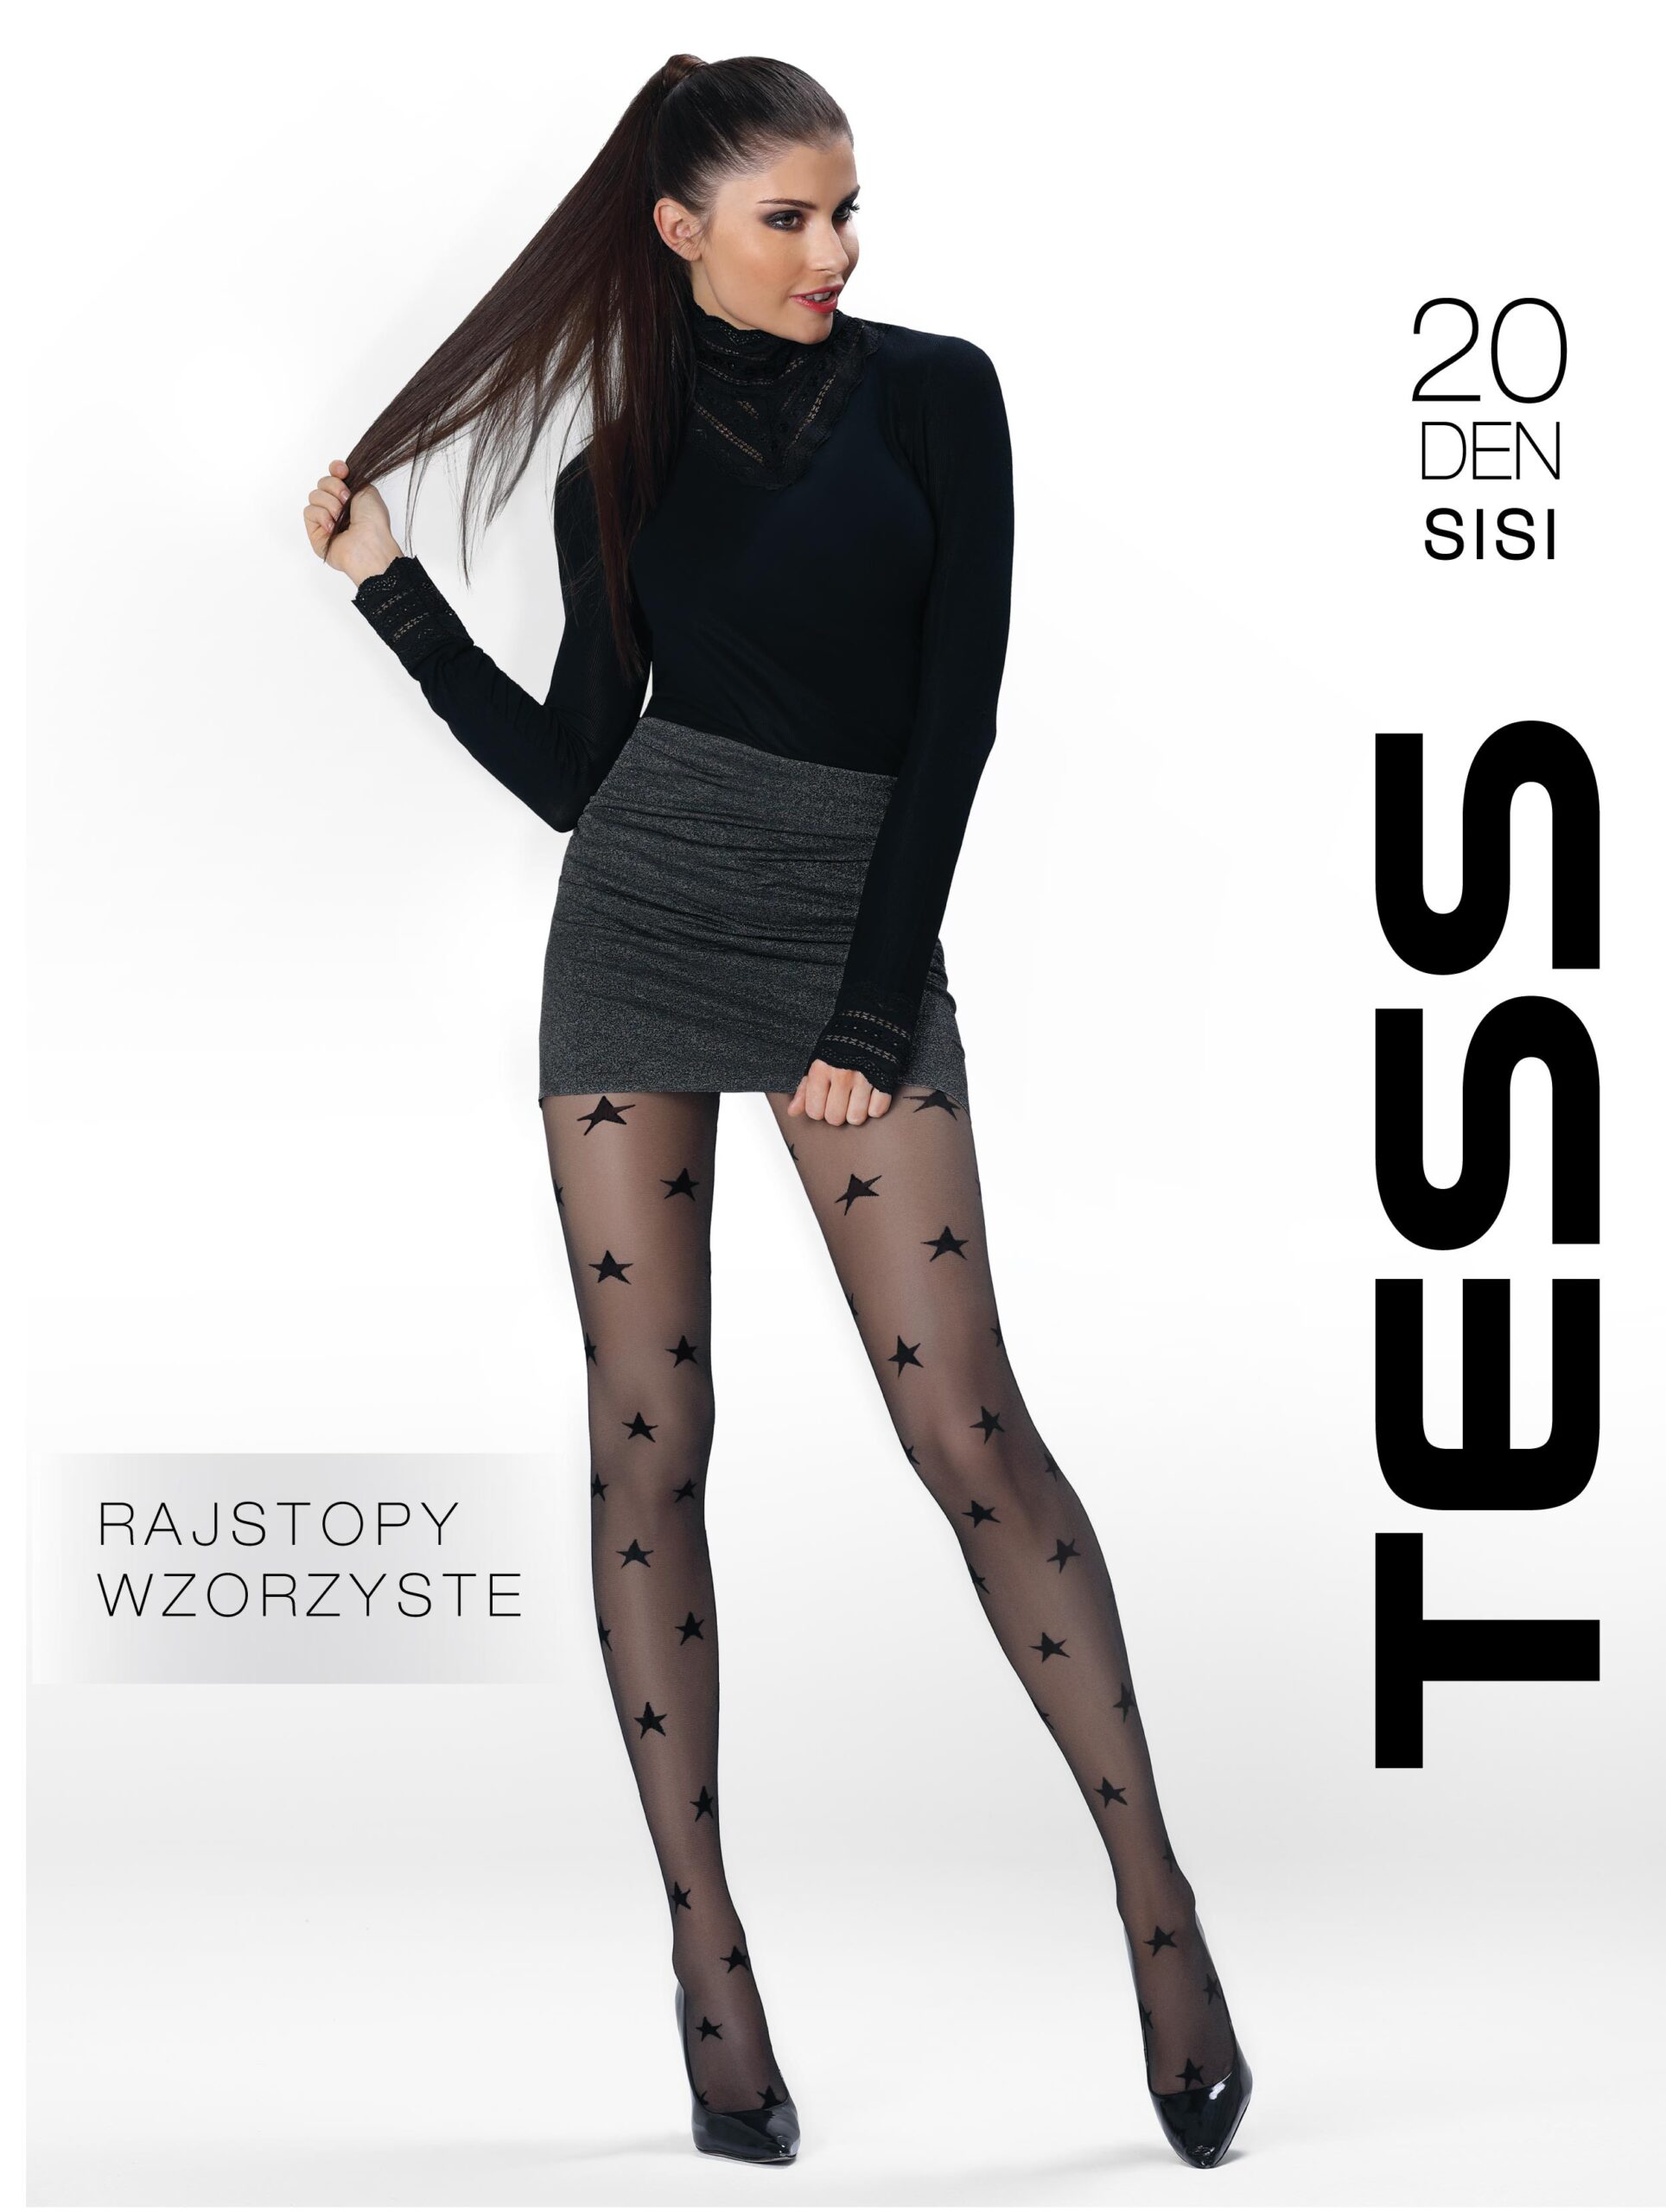 Sexy Ladies Fashion Design Stars Patterned Tights By Gajatex "SISI"